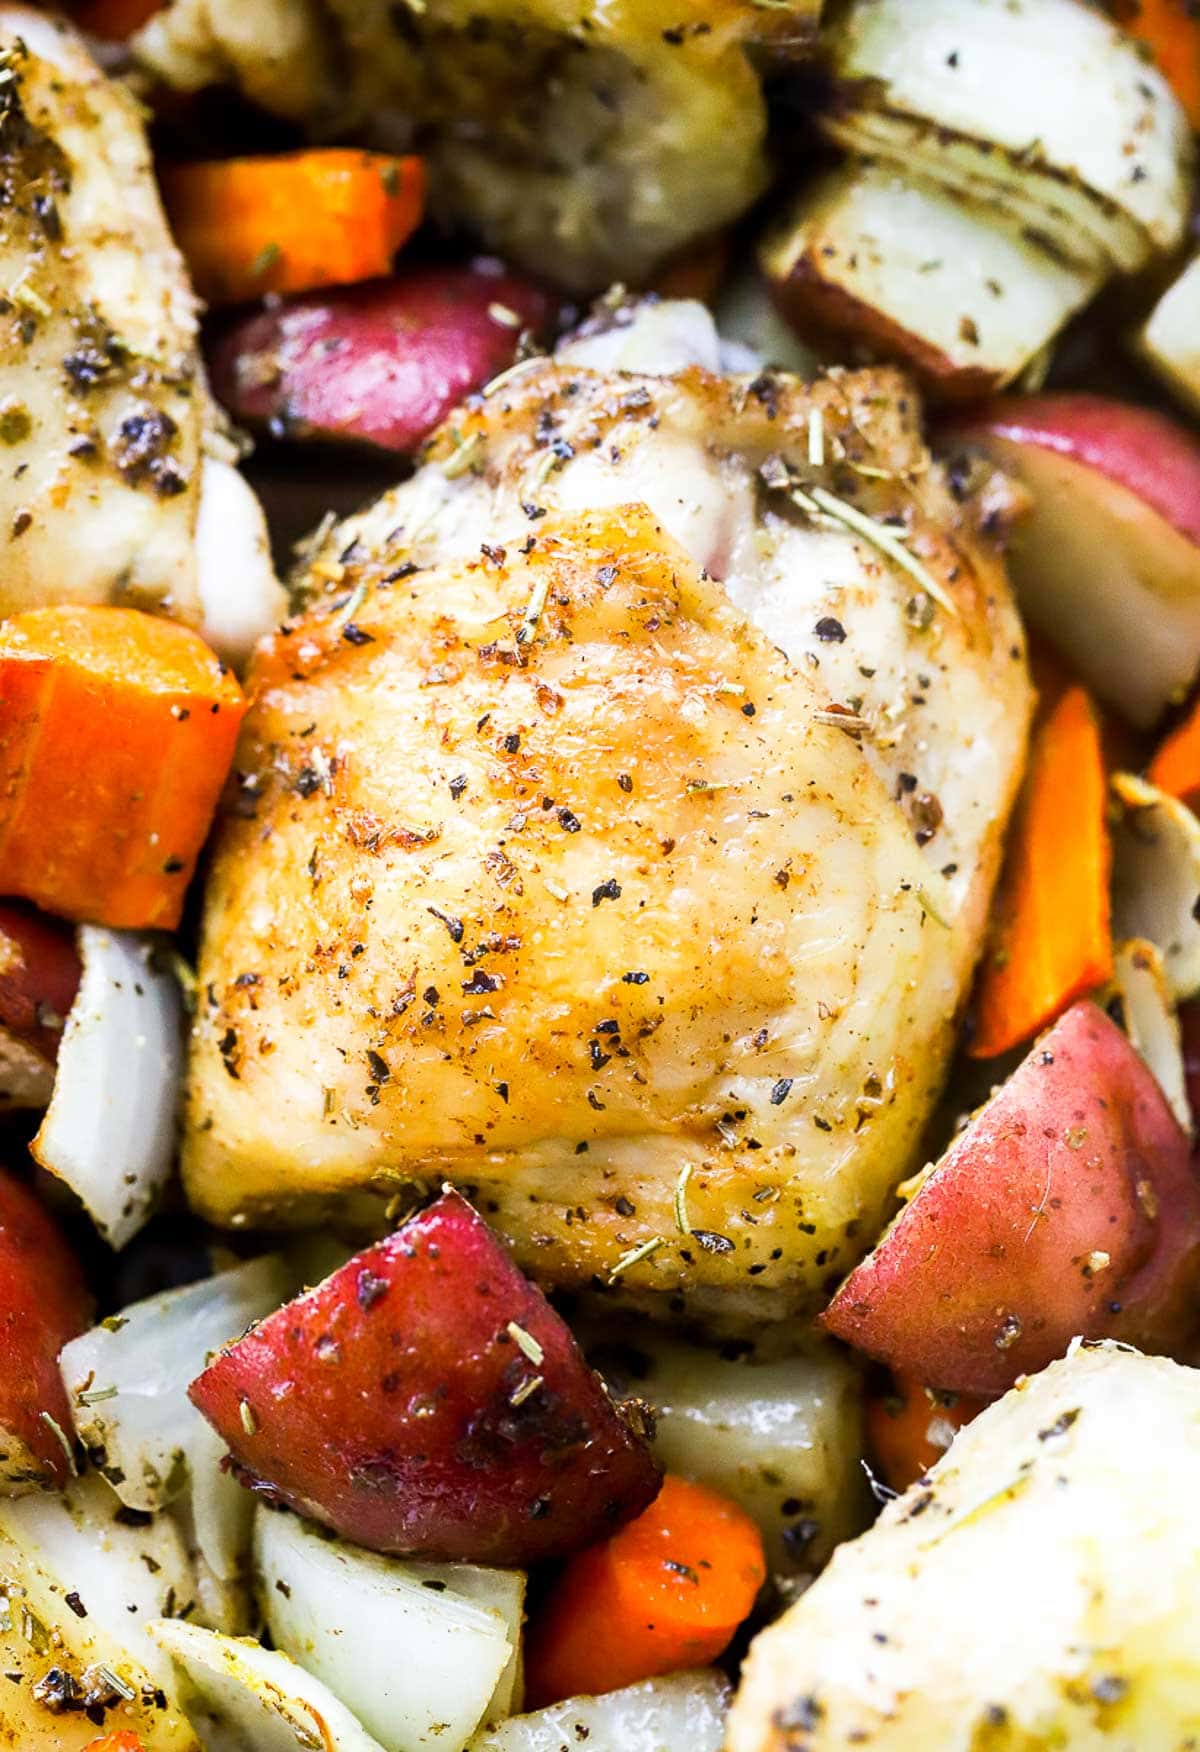 Close up of roasted chicken thigh surrounded by carrots and potatoes.